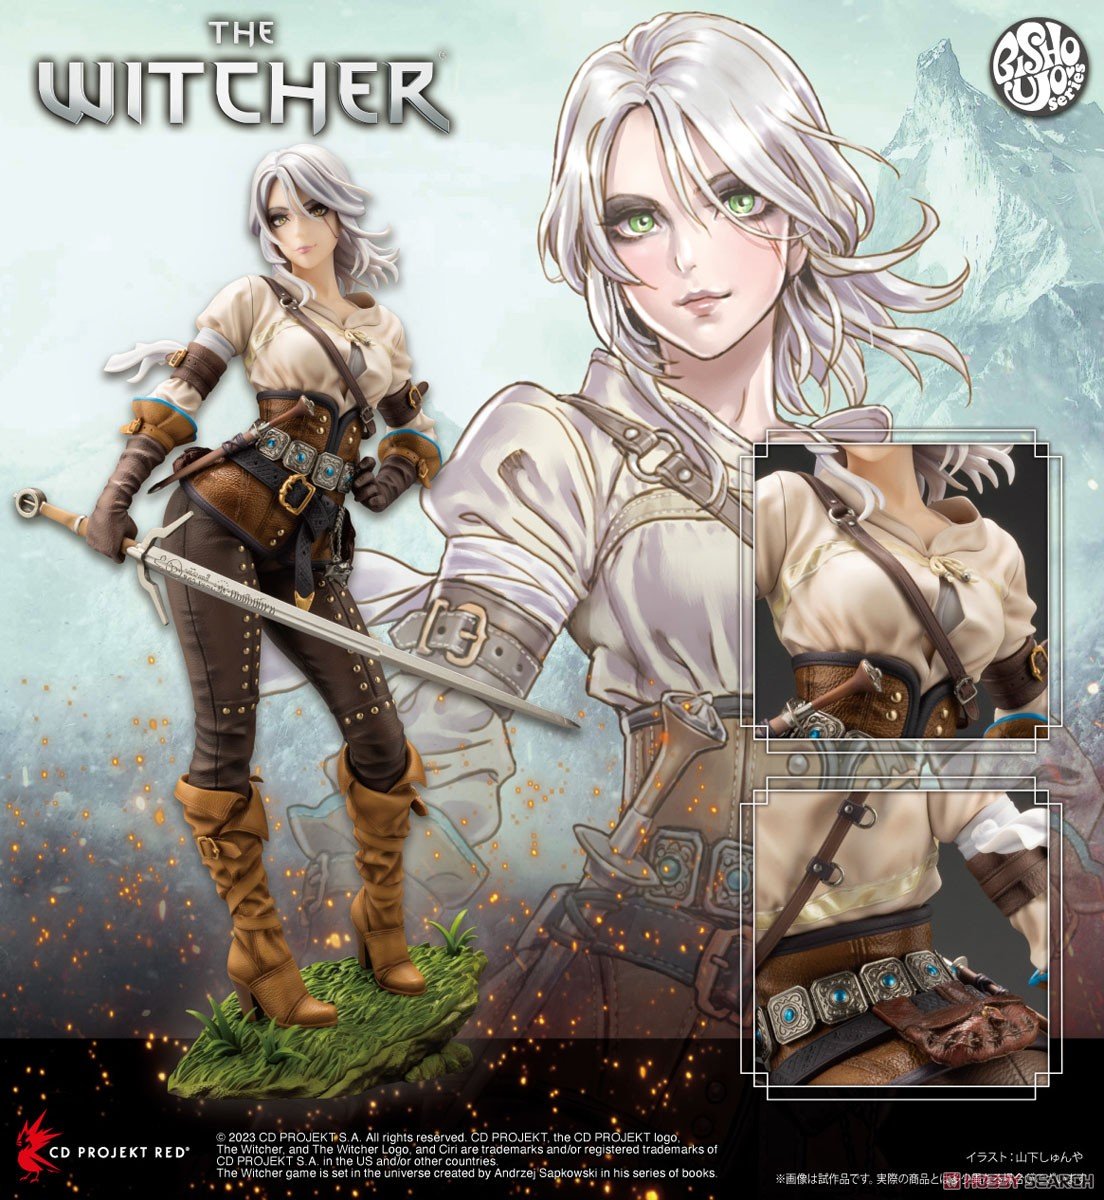 THE WITCHER美少女『シリ』ウィッチャー 1/7 完成品フィギュア-018